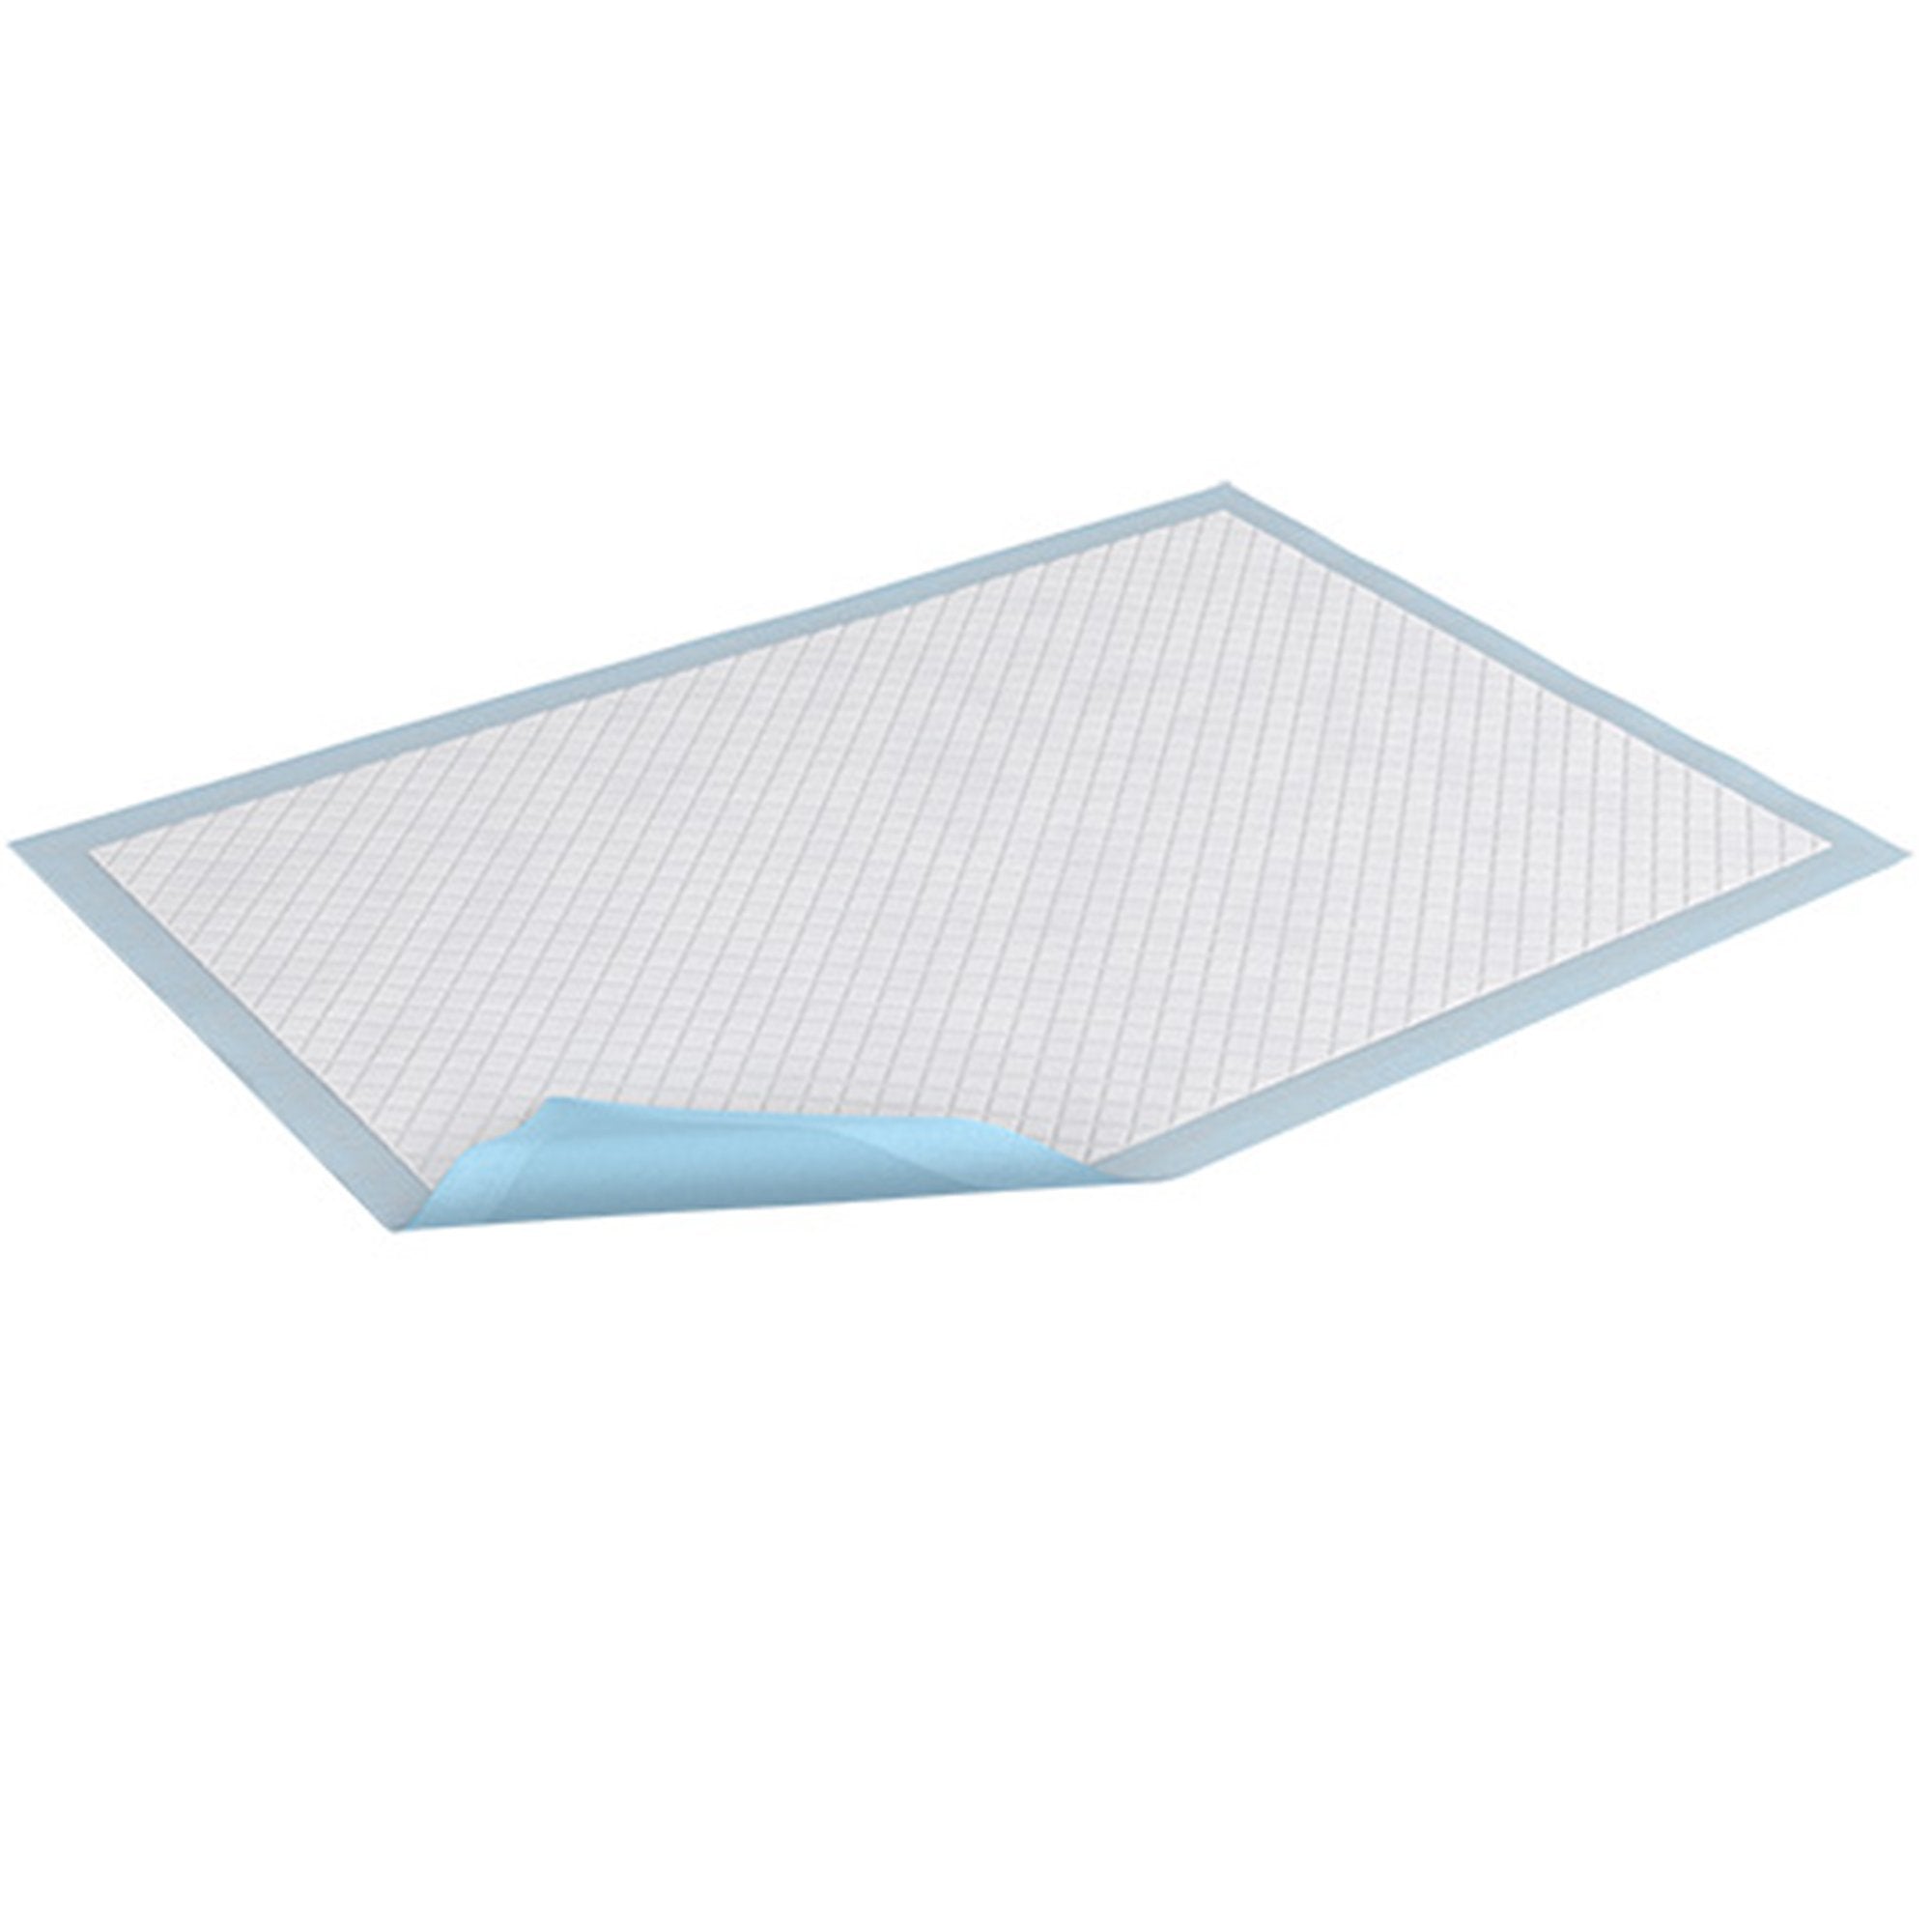 Disposable Underpad TENA Large 30 X 30 Inch Light Absorbency